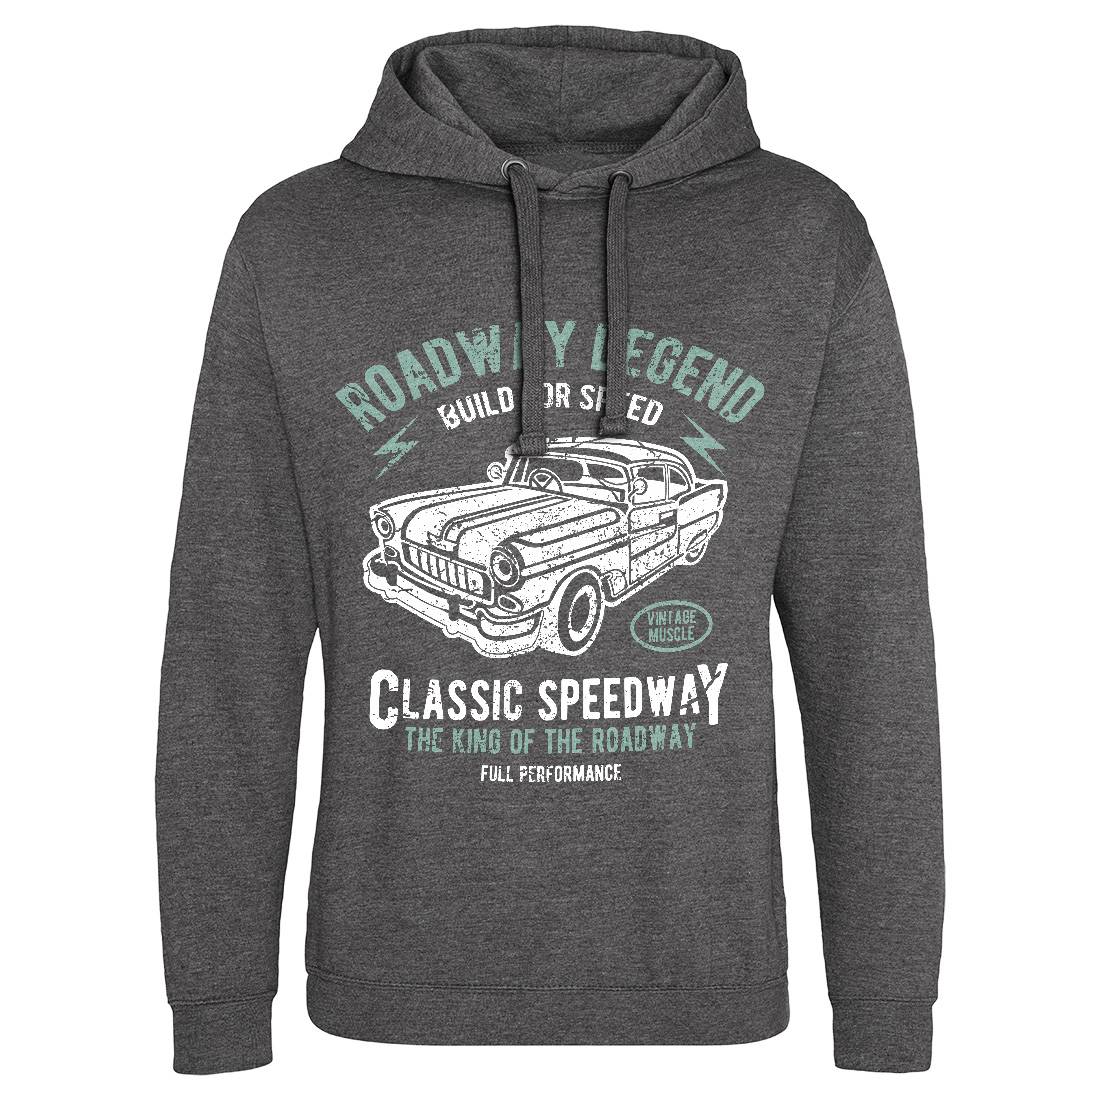 Roadway Legend Mens Hoodie Without Pocket Cars A124